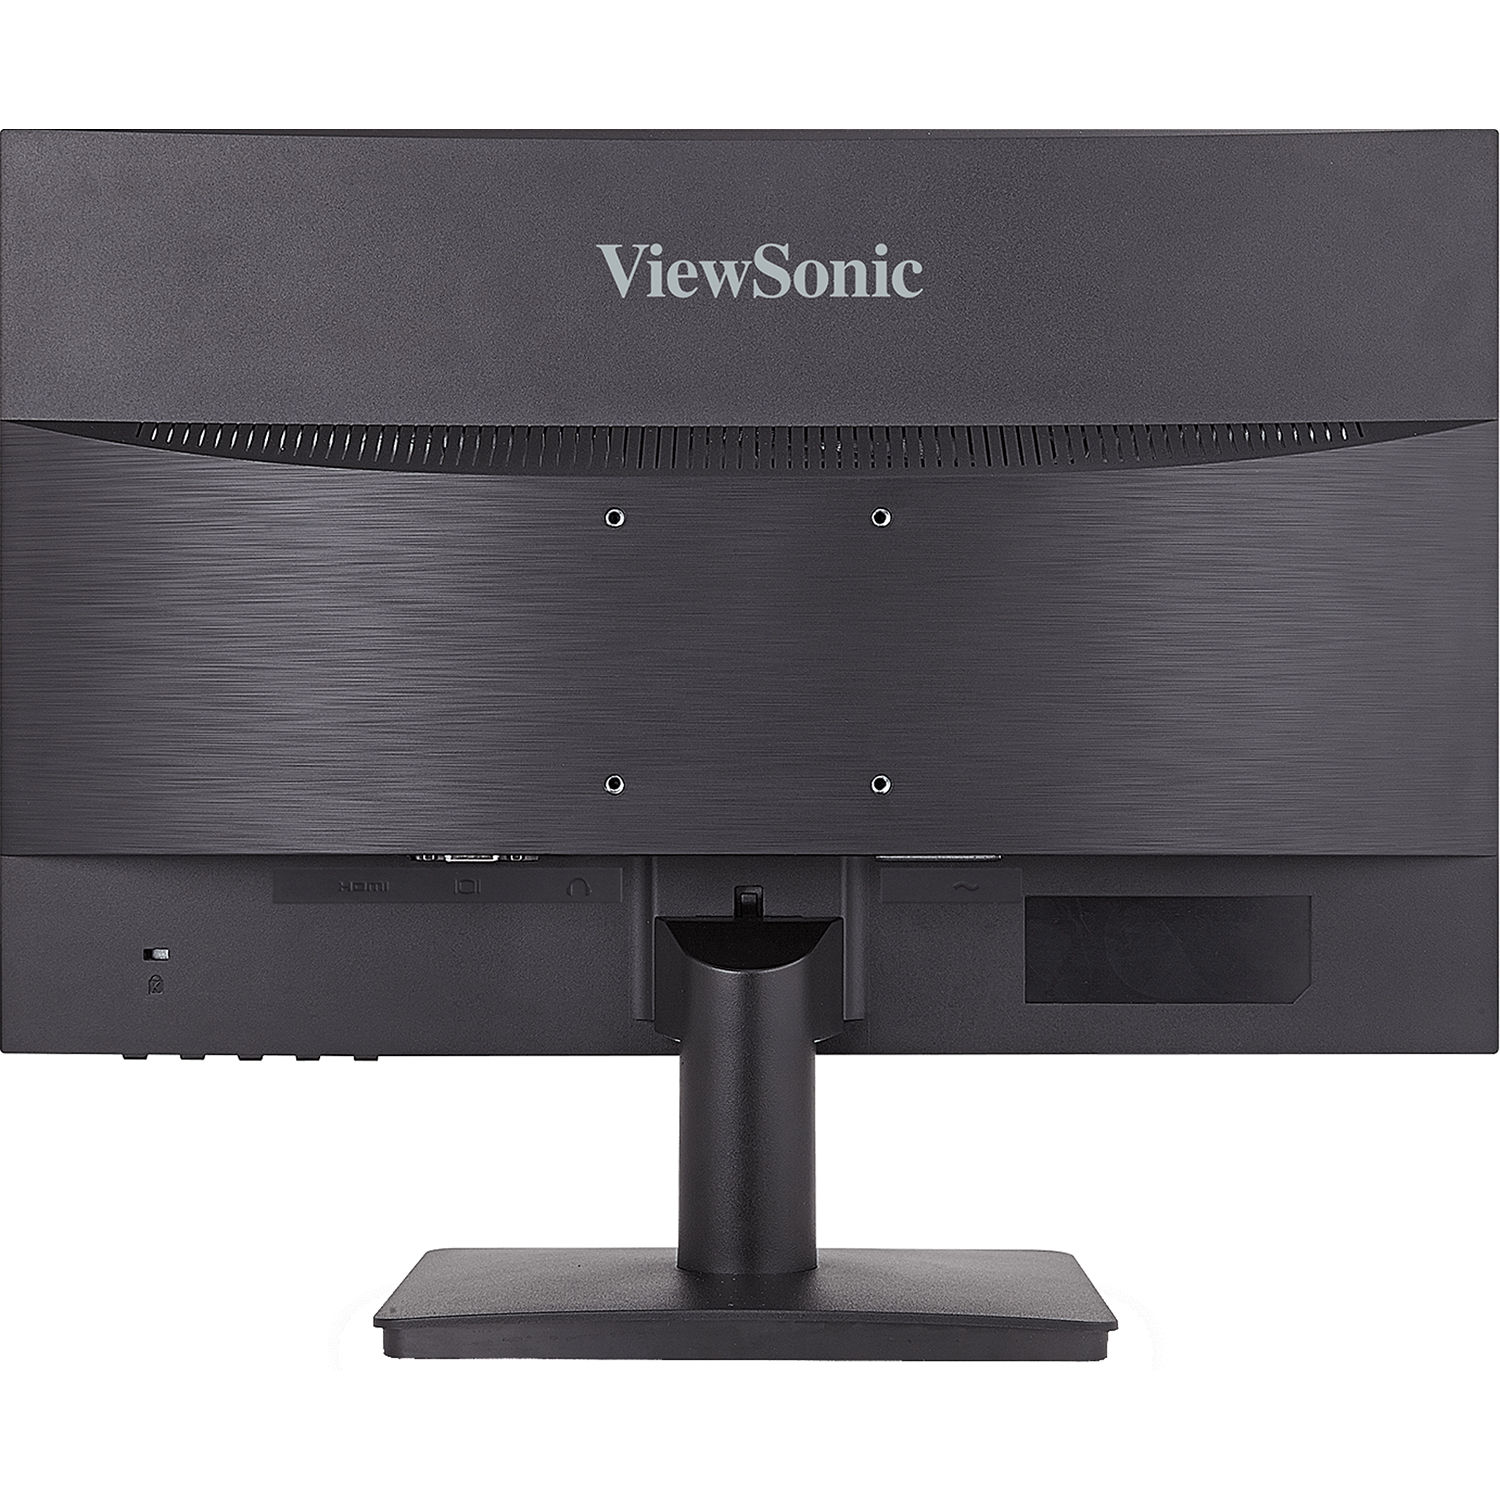 ViewSonic VA1903H-R 19" Home and Office Monitor - Certified Refurbished